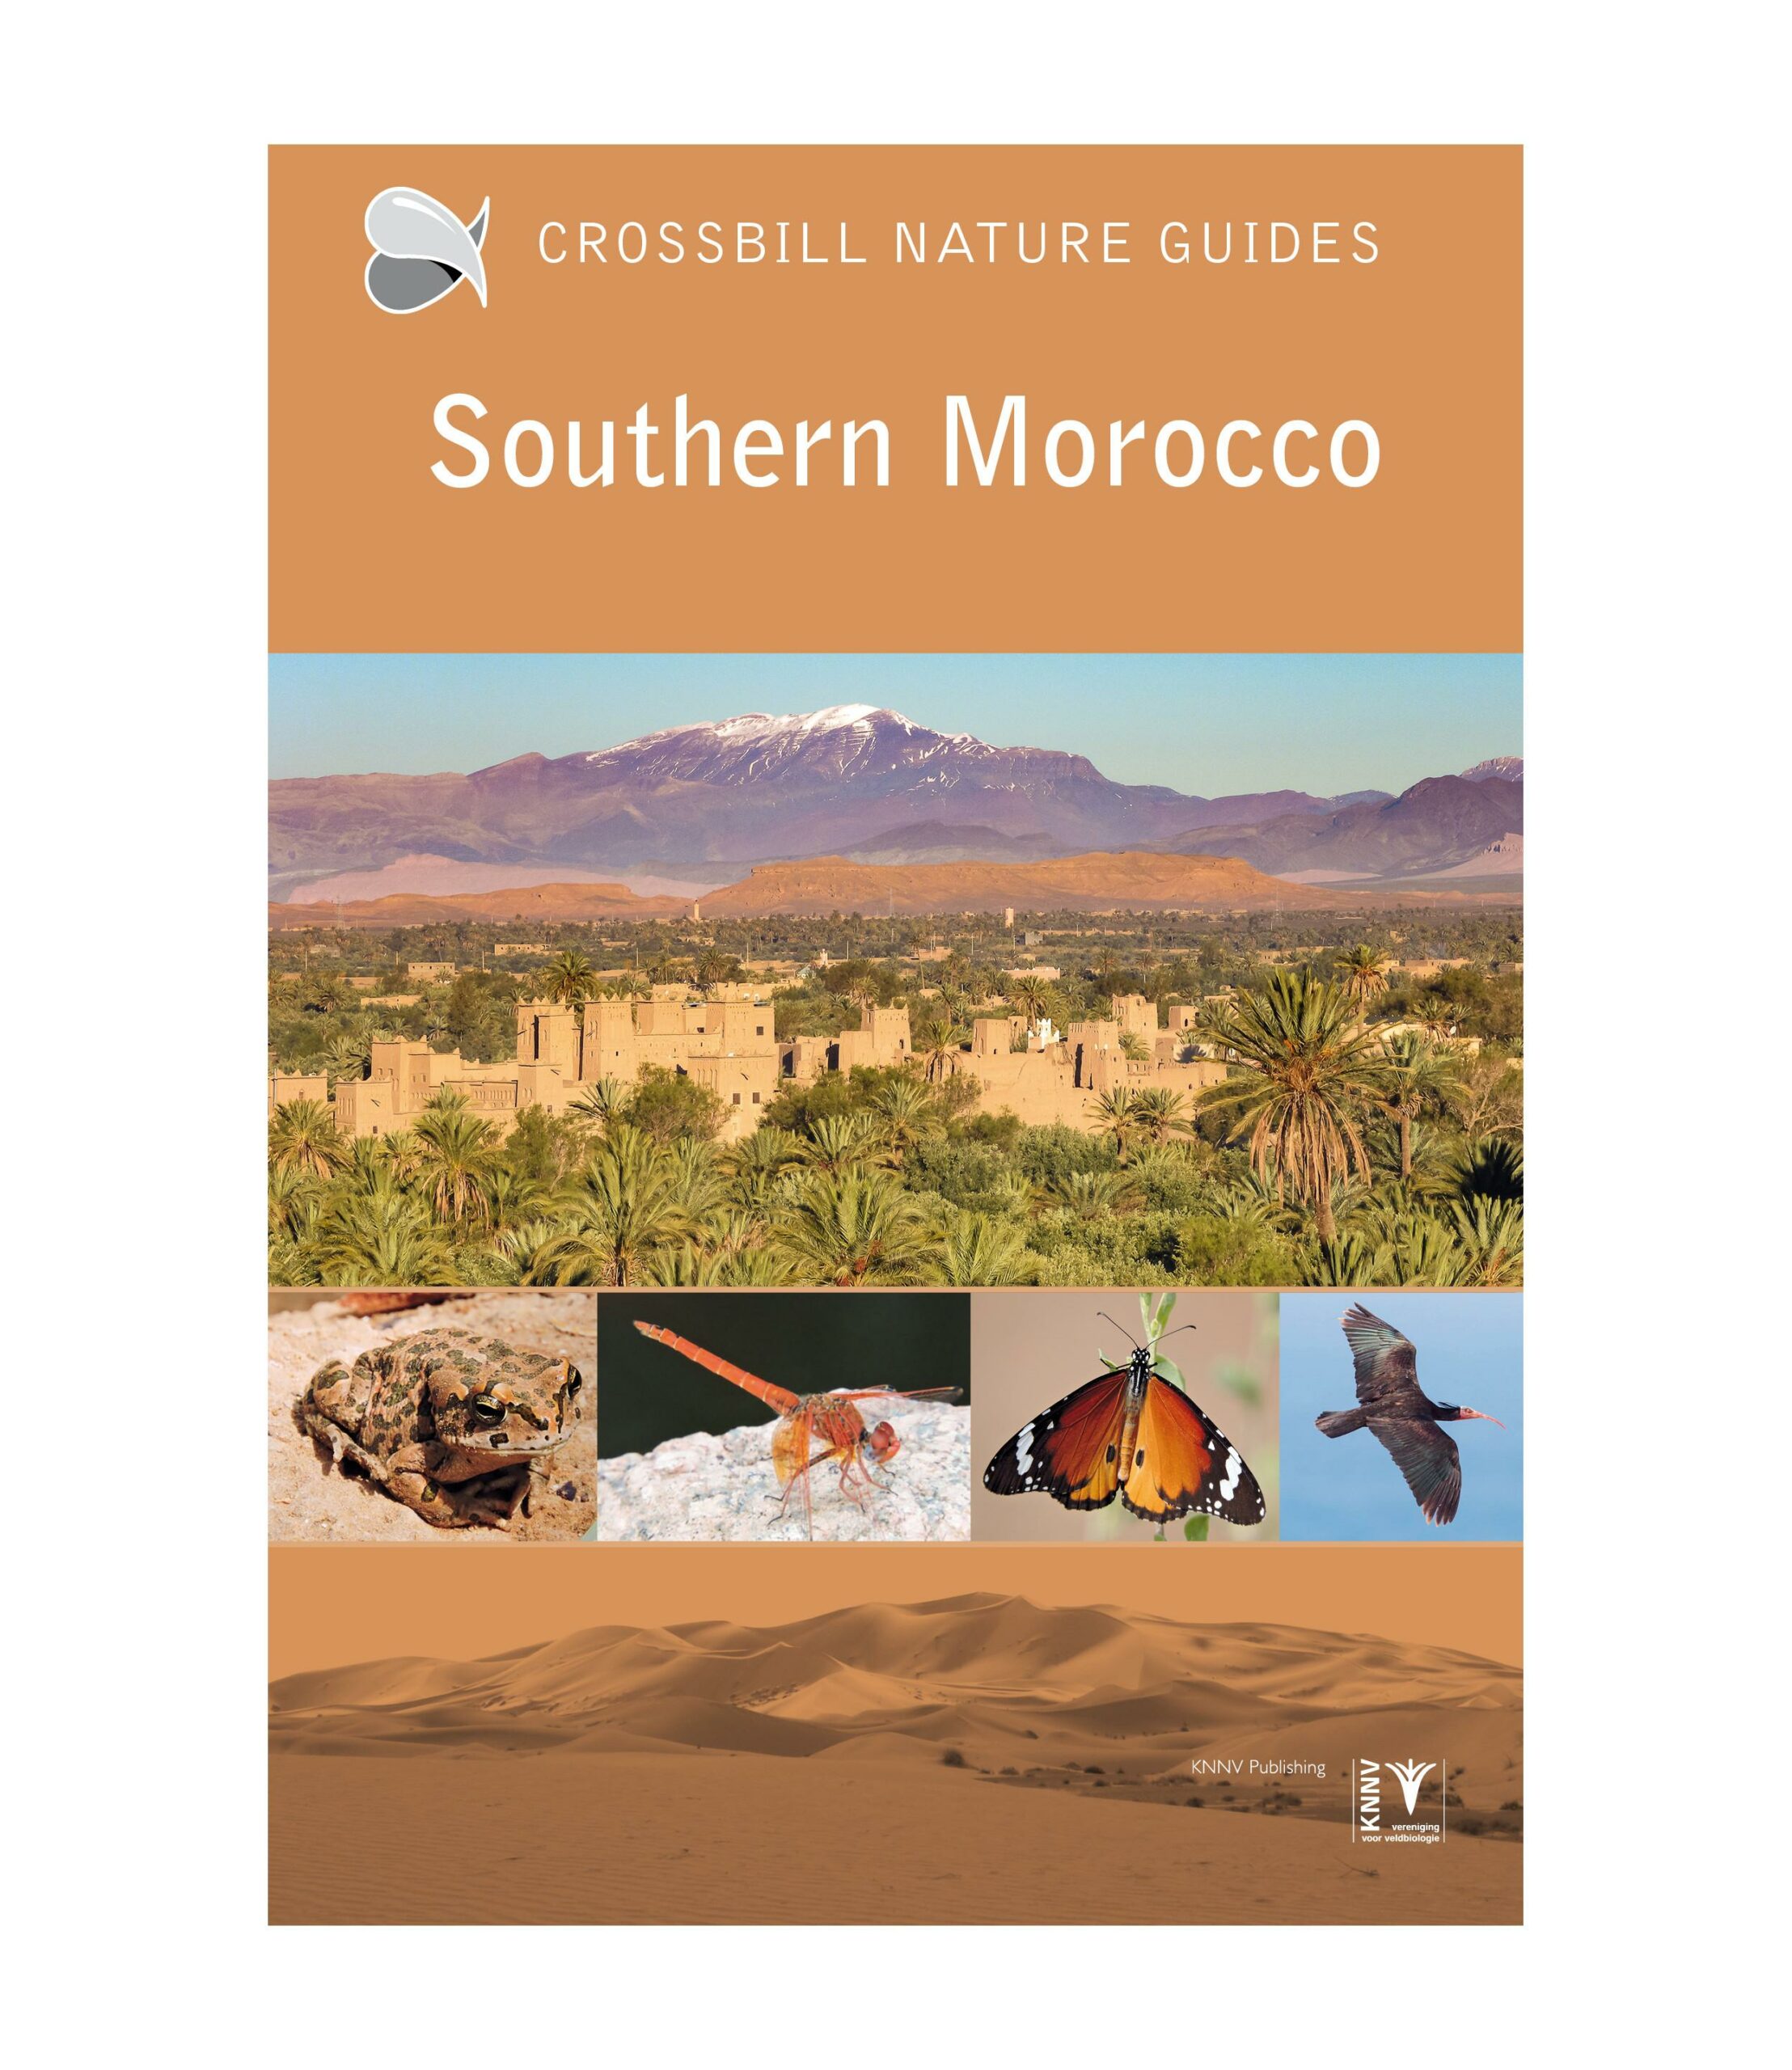 Crossbill Guides: Southern Morocco